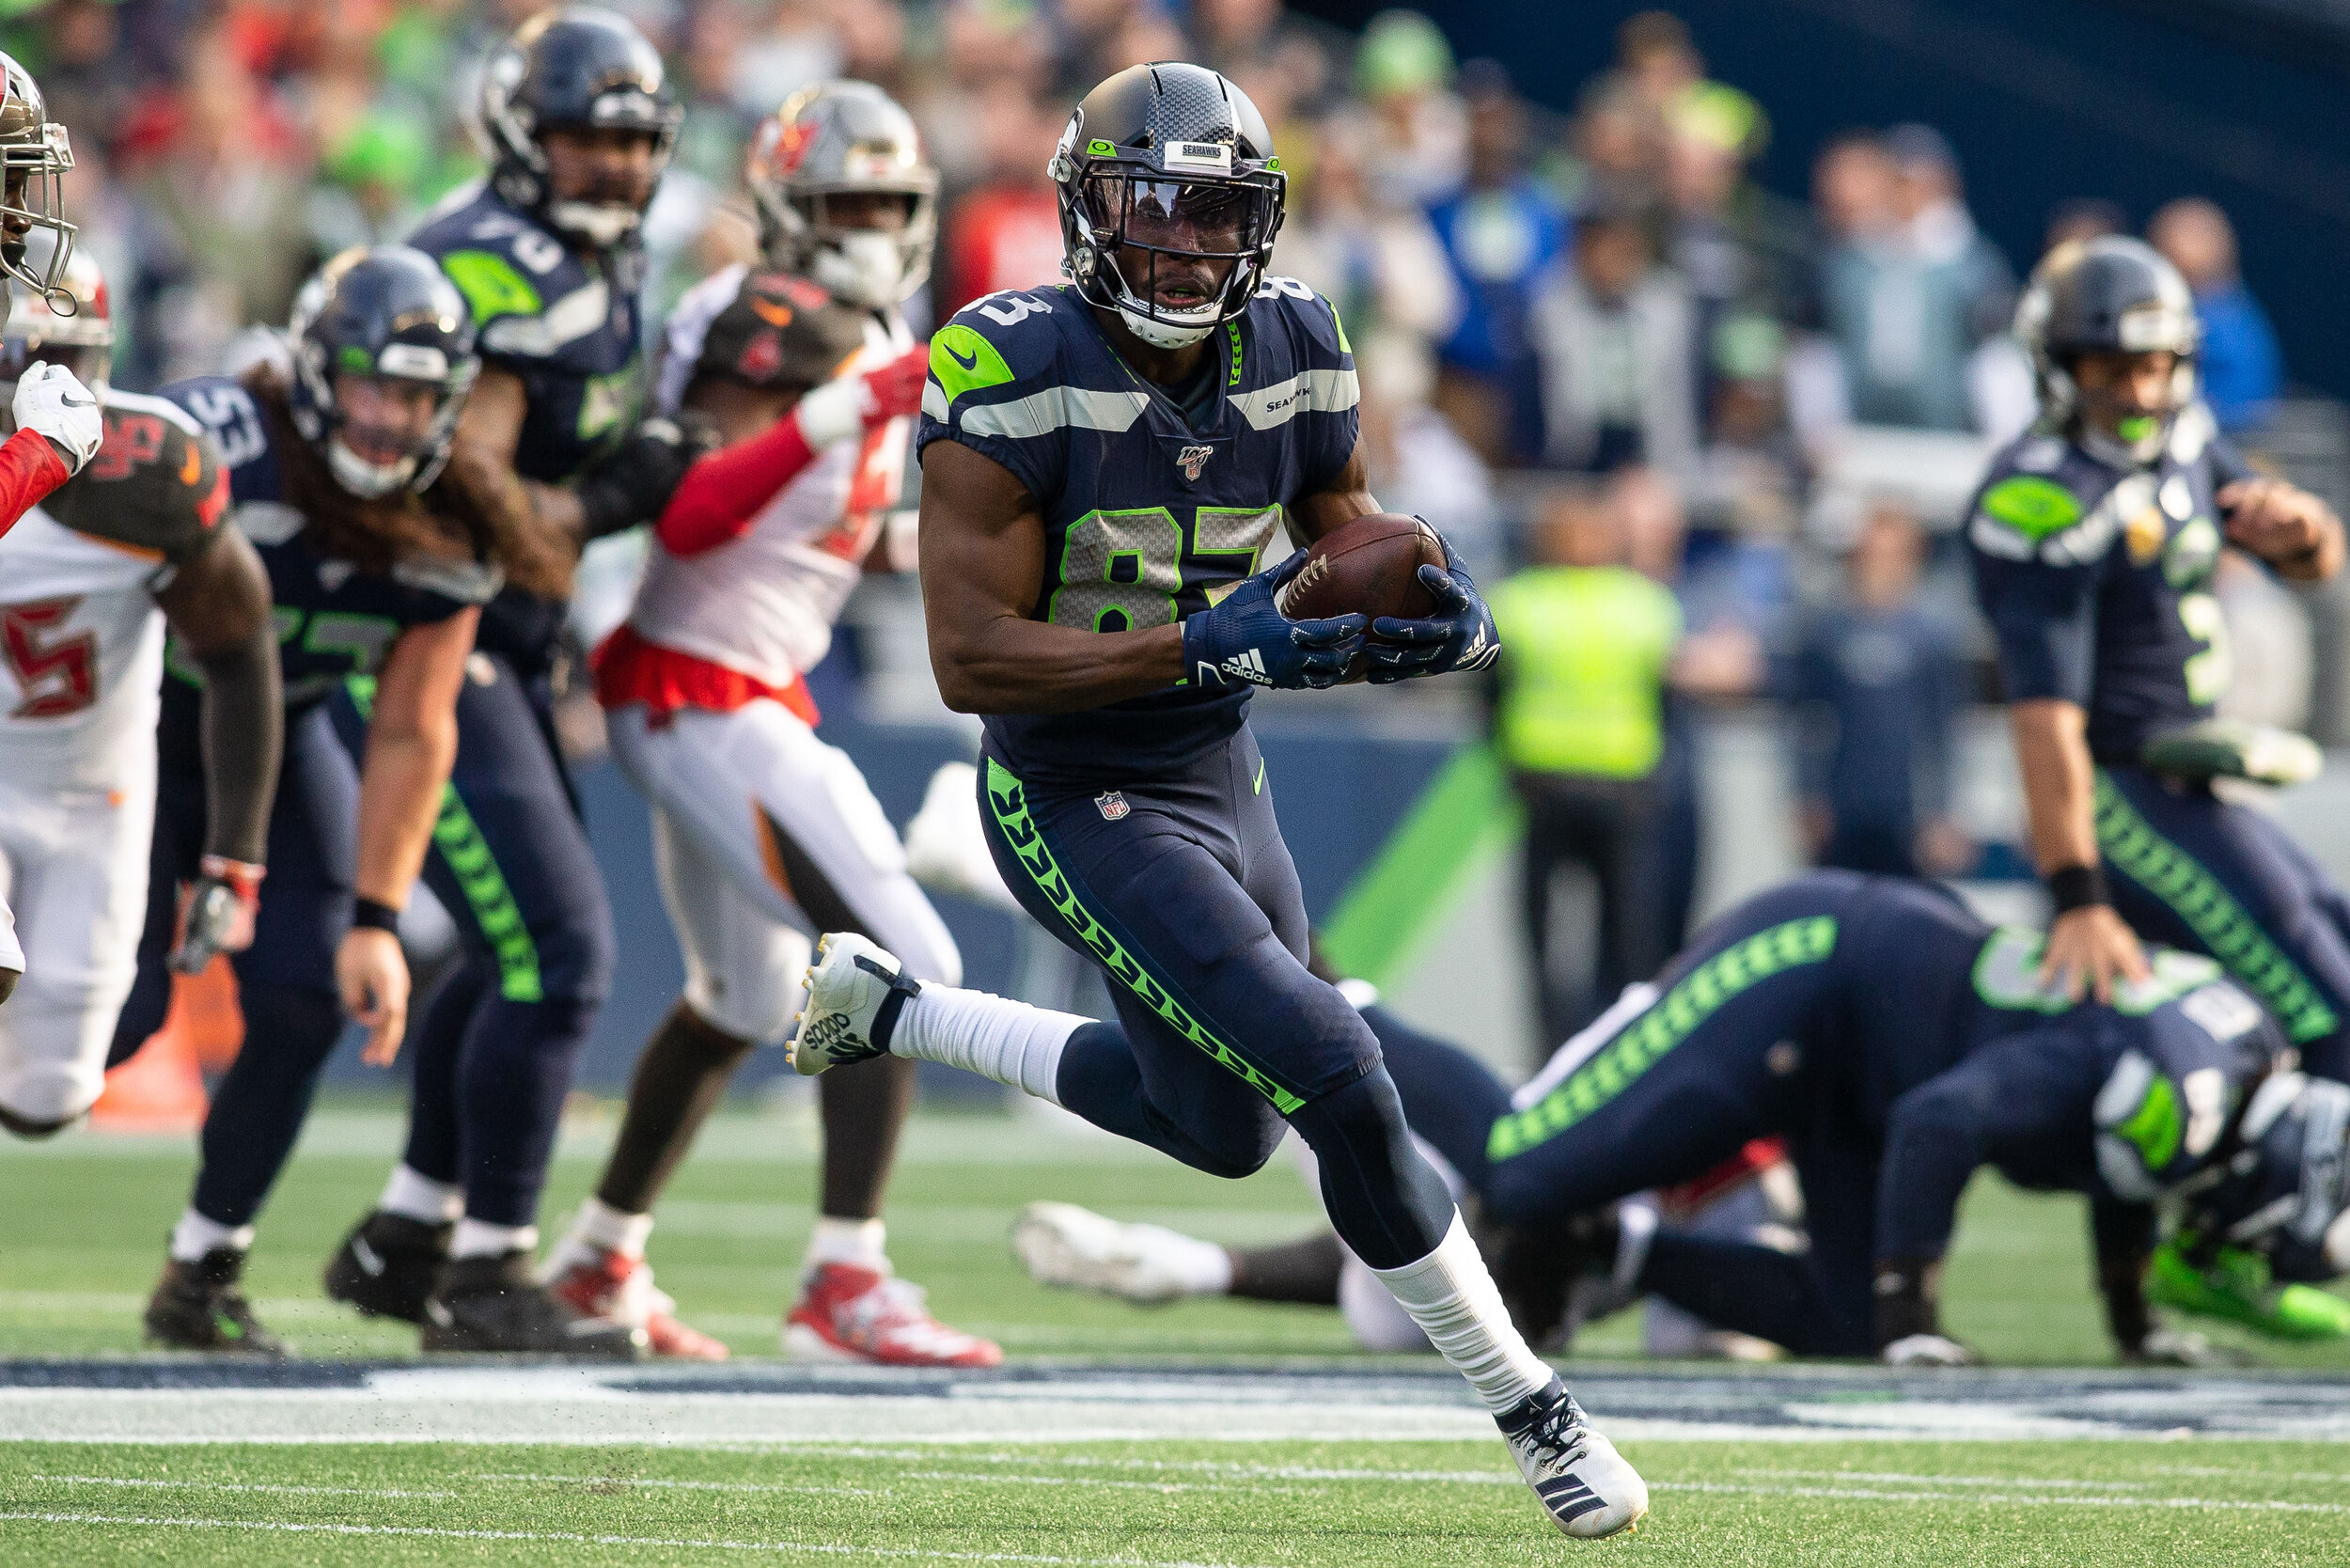  Seattle Seahawks wide receiver David Moore (83) runs with the ball after a catch in the second quarter of an NFL football game against the Tampa Bay Buccaneers, Sunday, Nov. 3, 2019, in Seattle. Seattle defeated Tampa Bay 40-34 in overtime. (Matt Fe